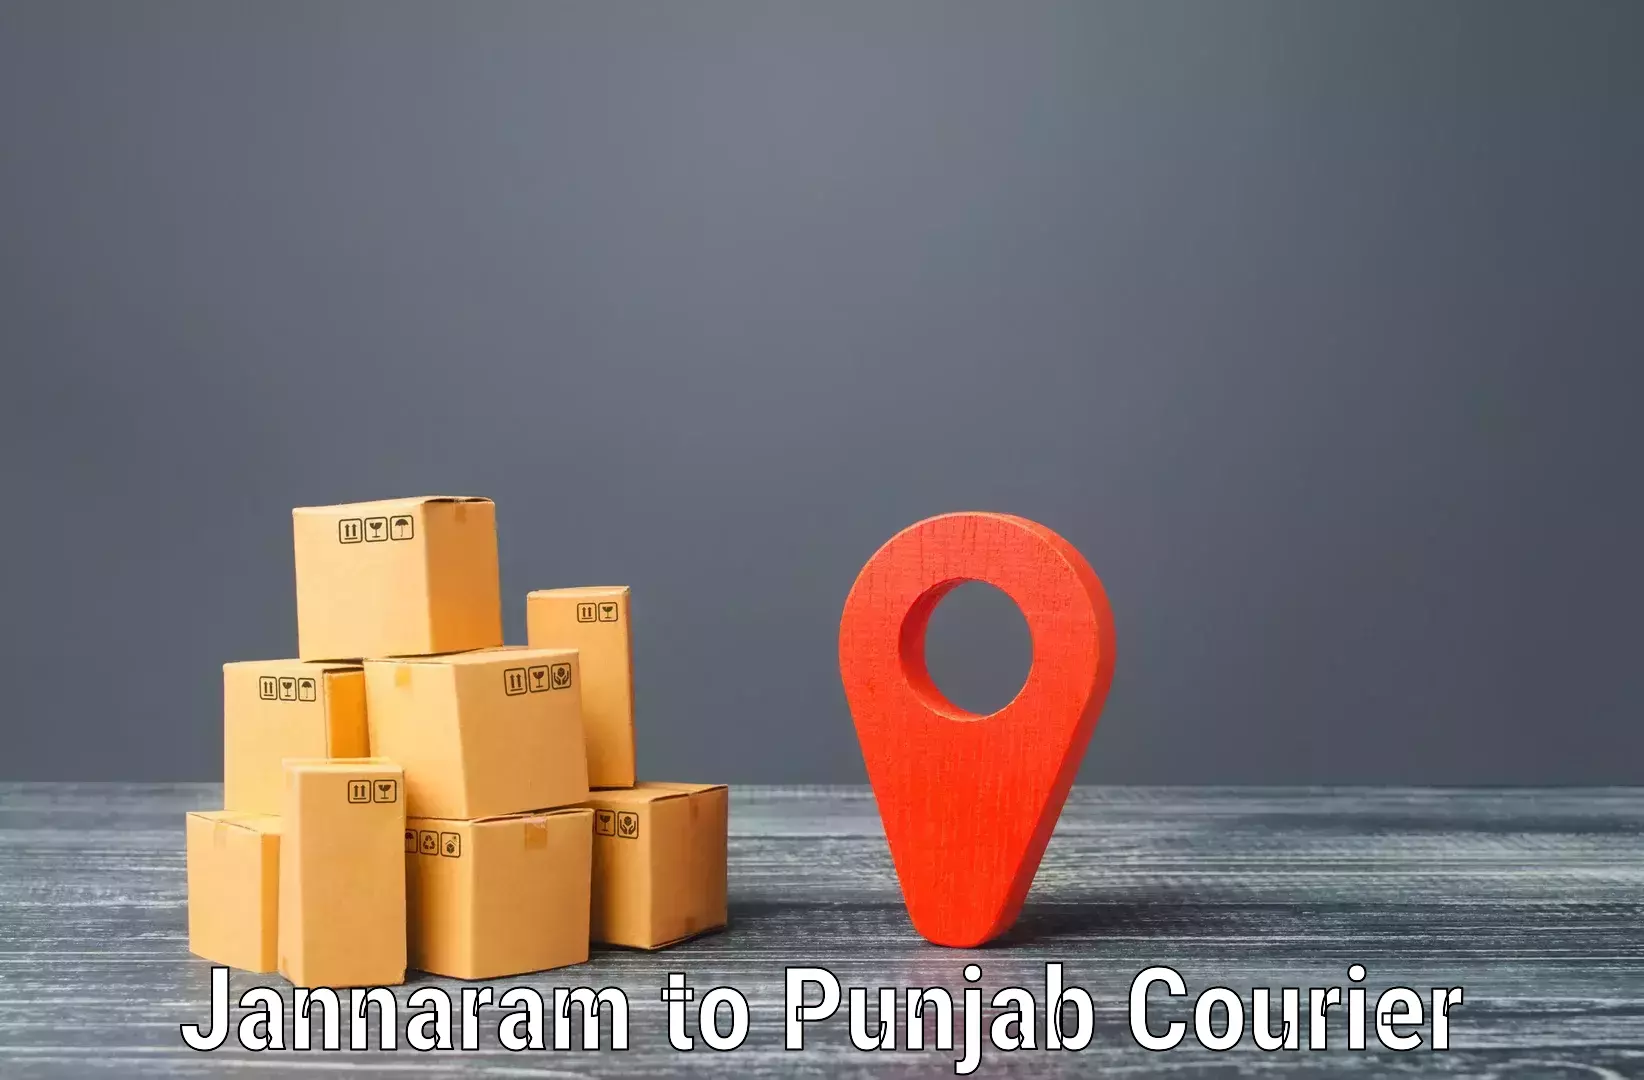 Round-the-clock parcel delivery in Jannaram to Dhilwan